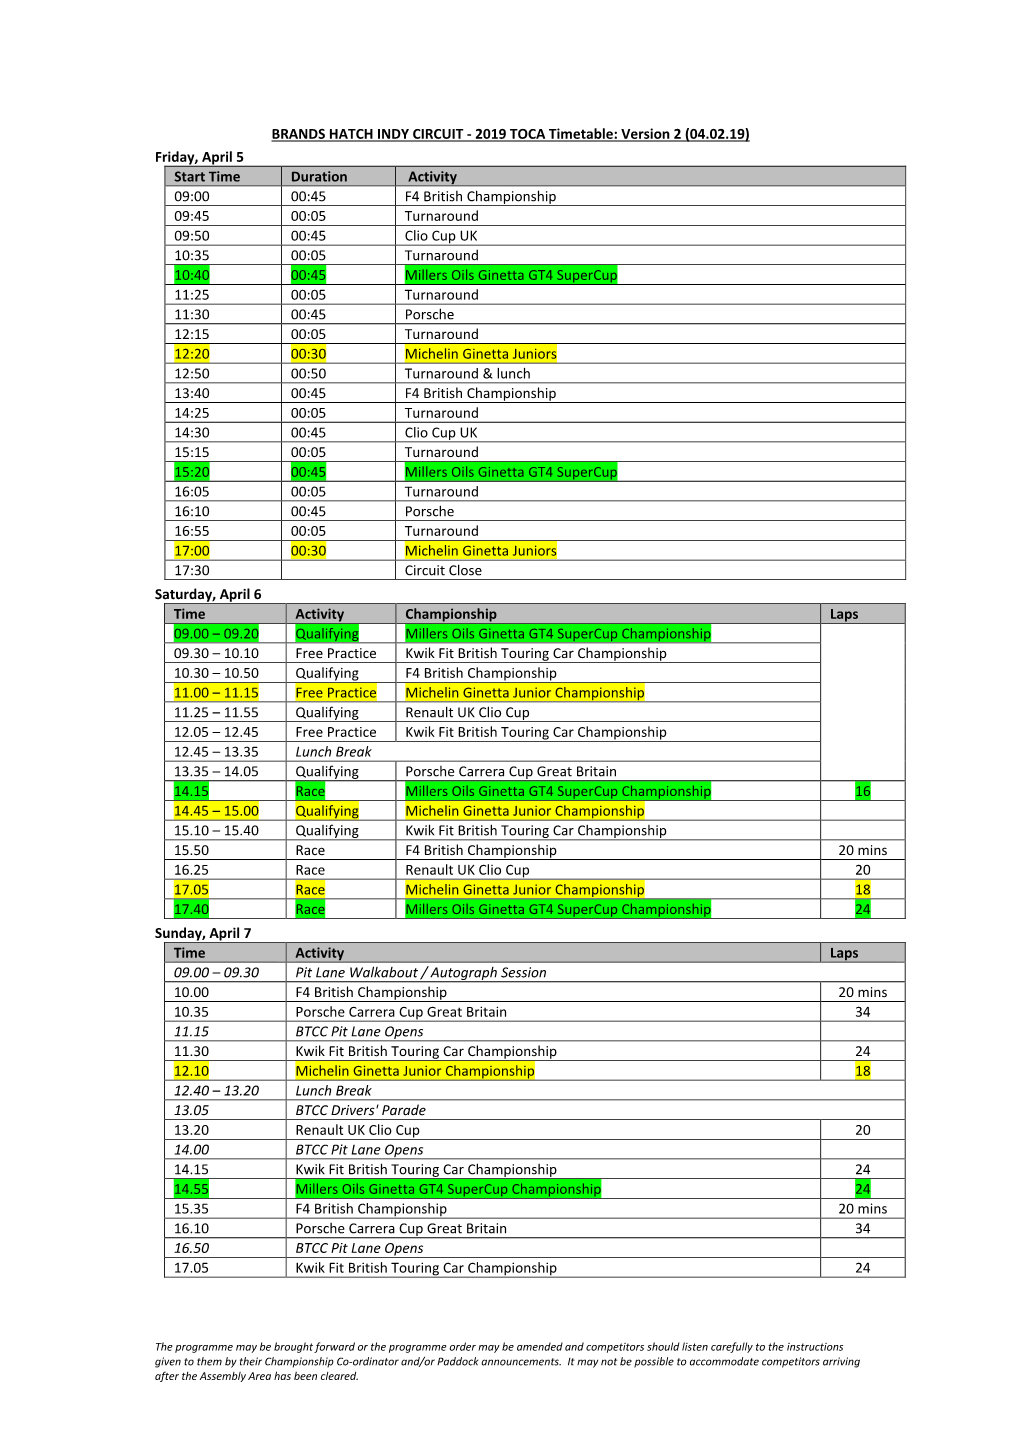 BRANDS HATCH INDY CIRCUIT - 2019 TOCA Timetable: Version 2 (04.02.19)